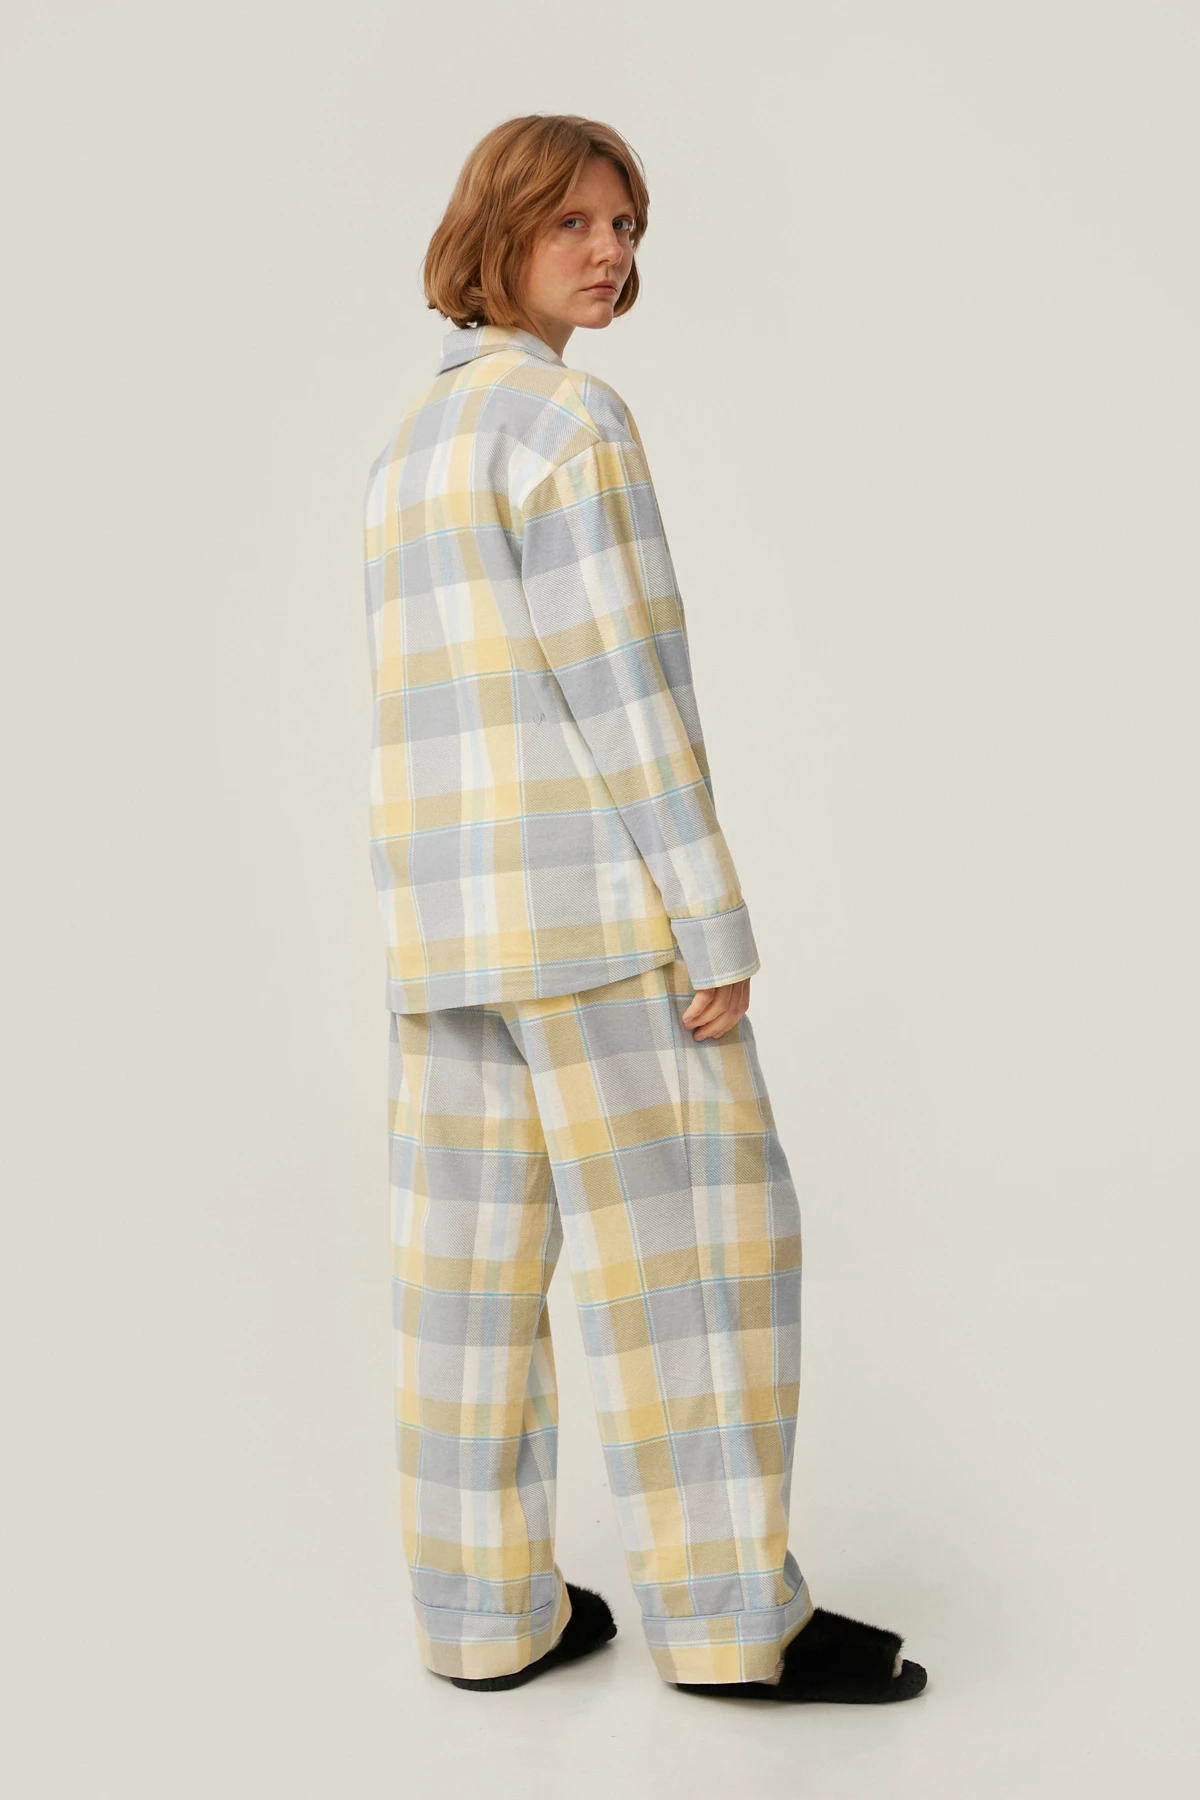 Pajama flanelette shirt in yellow and blue check, photo 4